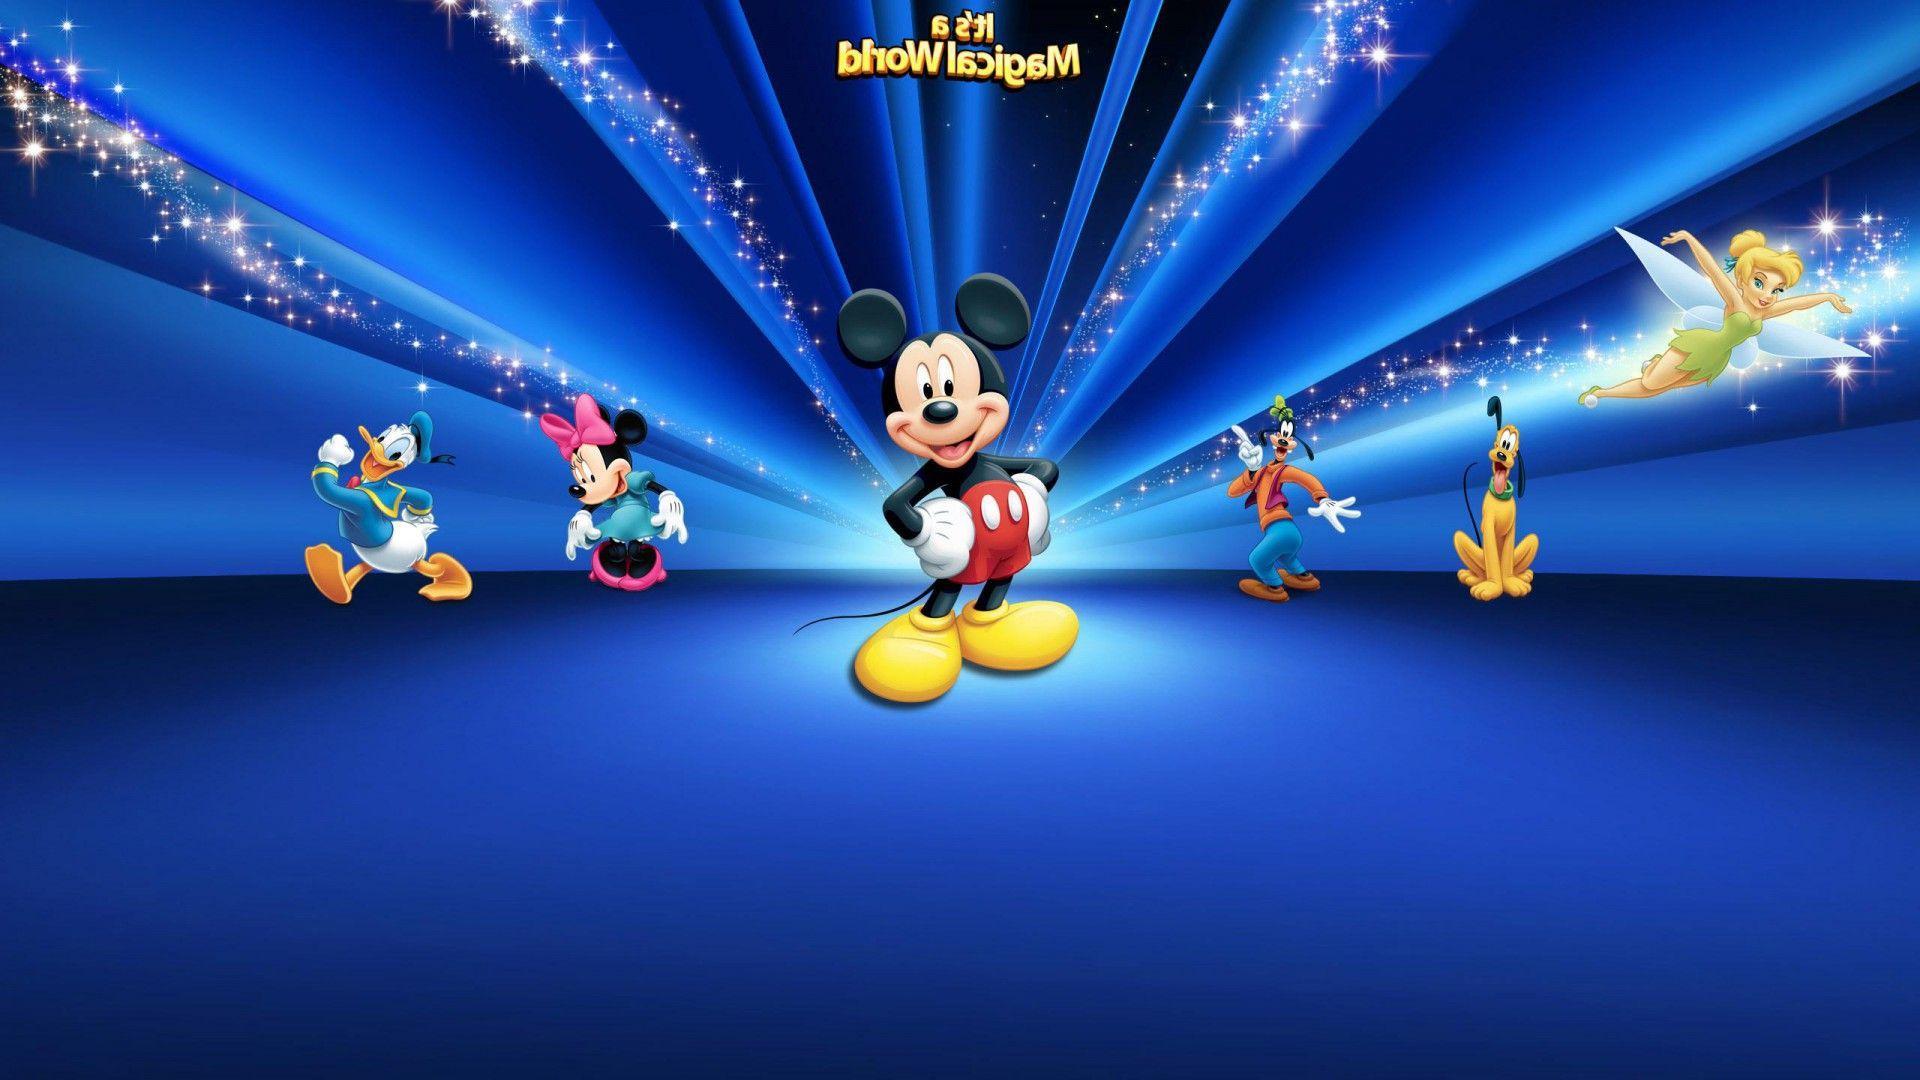 Mickey Mouse 3D Wallpaper